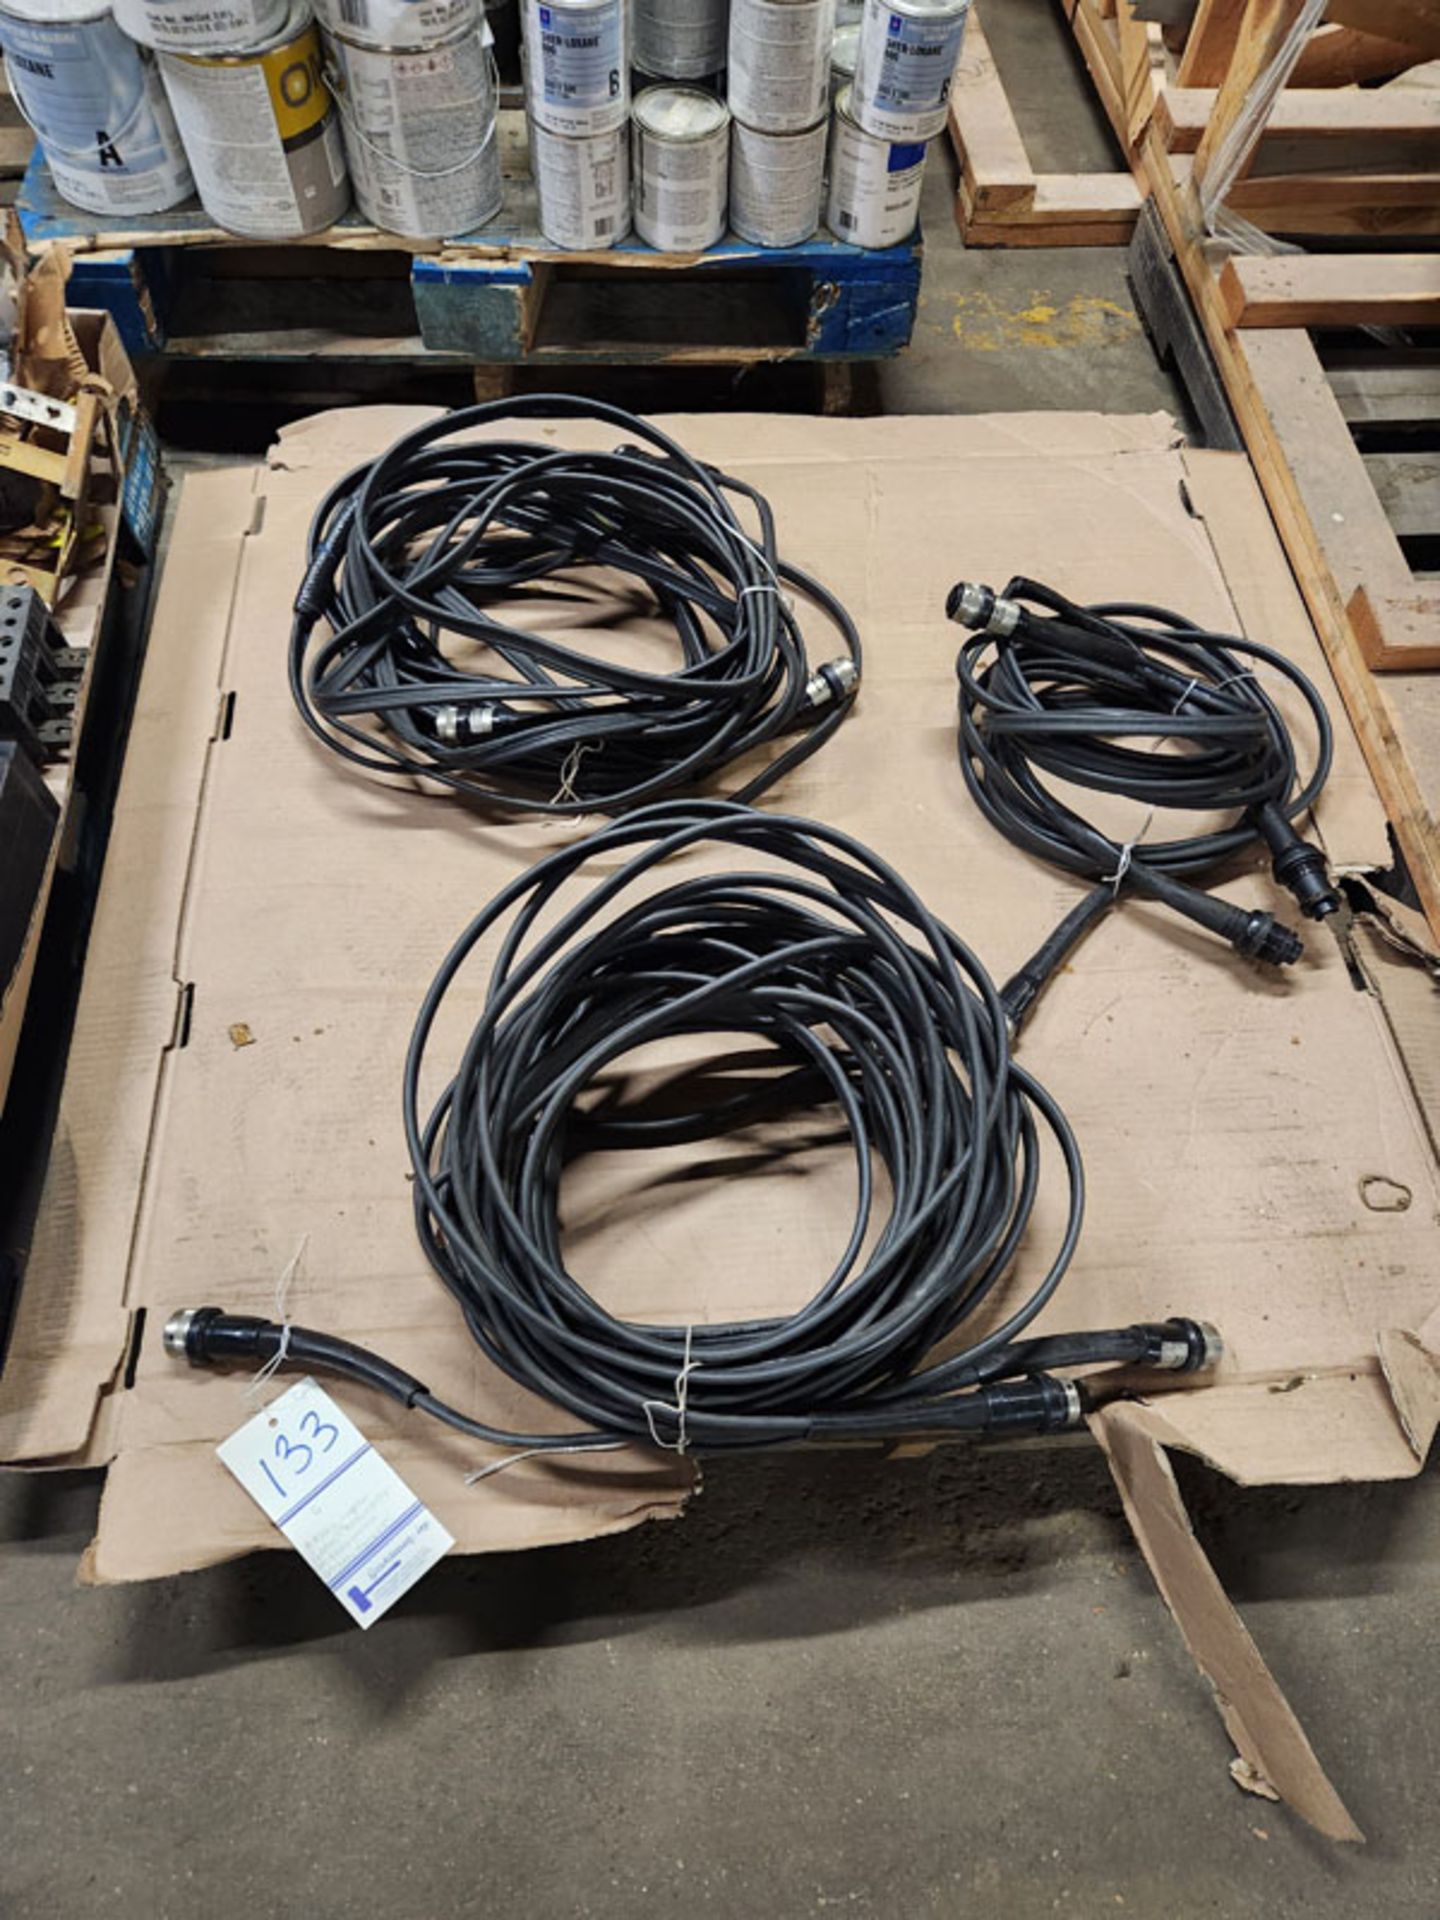 LOT OF 6 ASSORTED ATLAS COPCO CABLES - (2) 4220100715, (2) 4220100710, AND (2) 4220163605